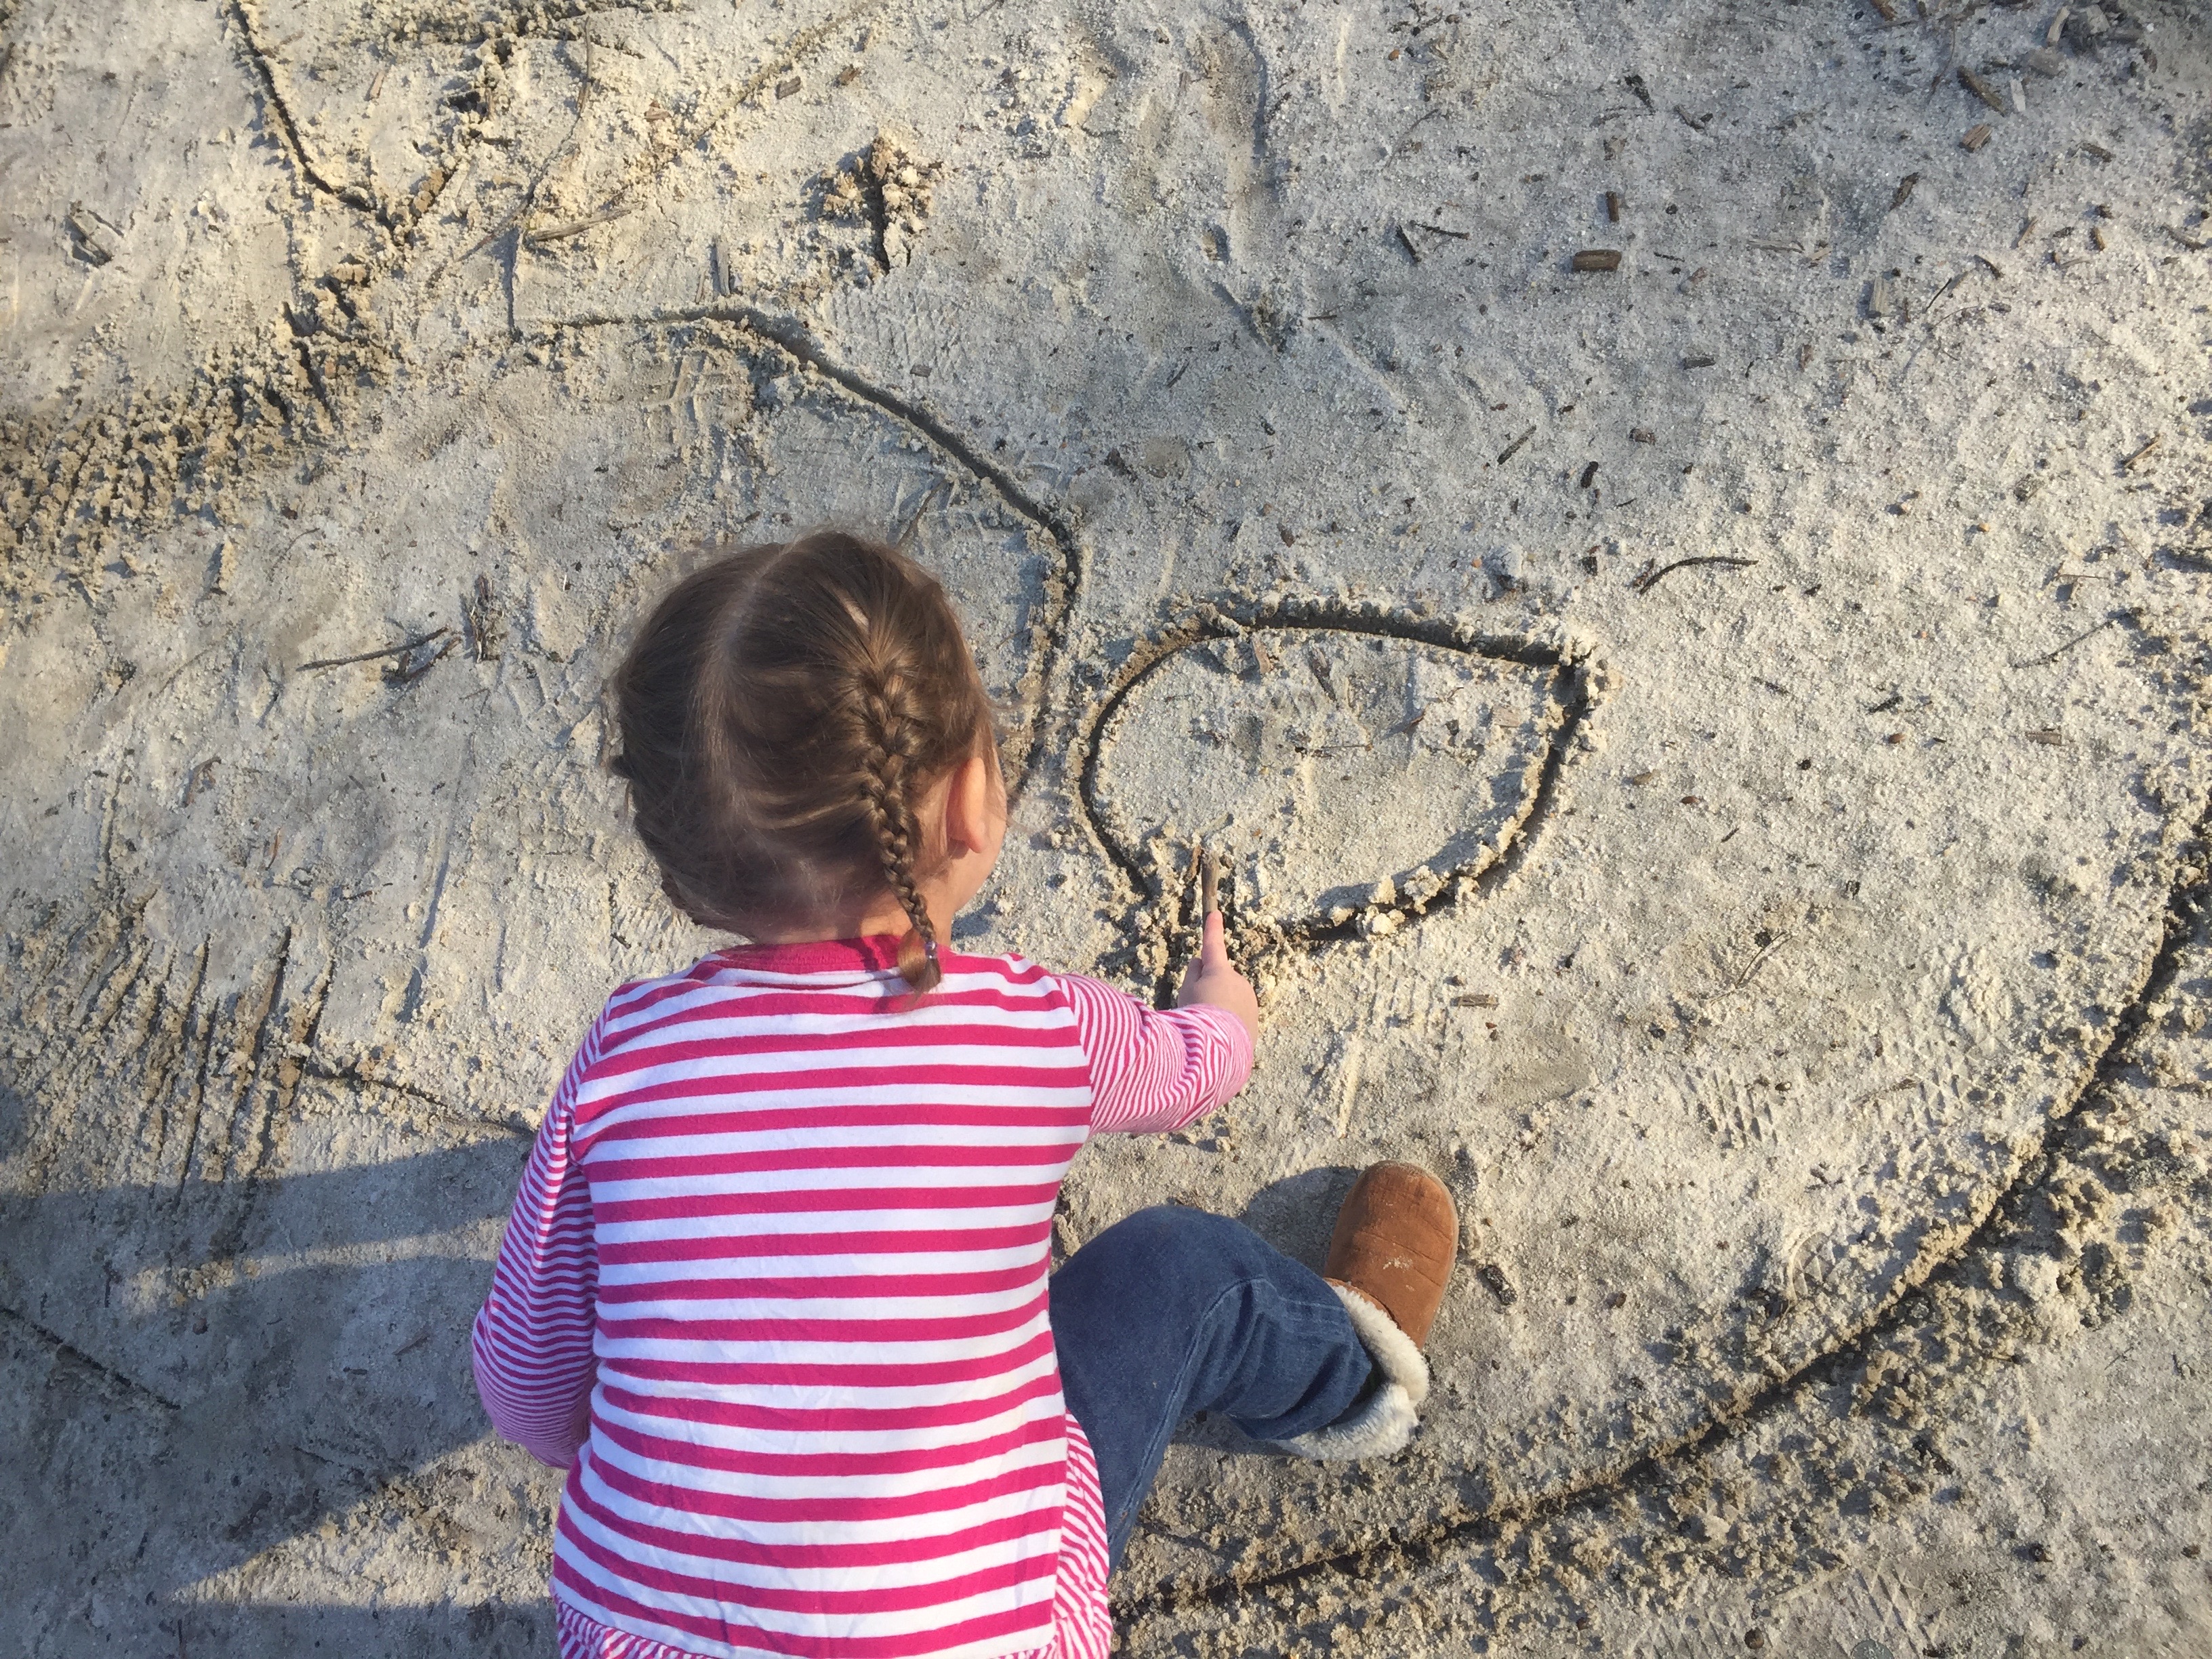 Child using a stick to draw in sand.